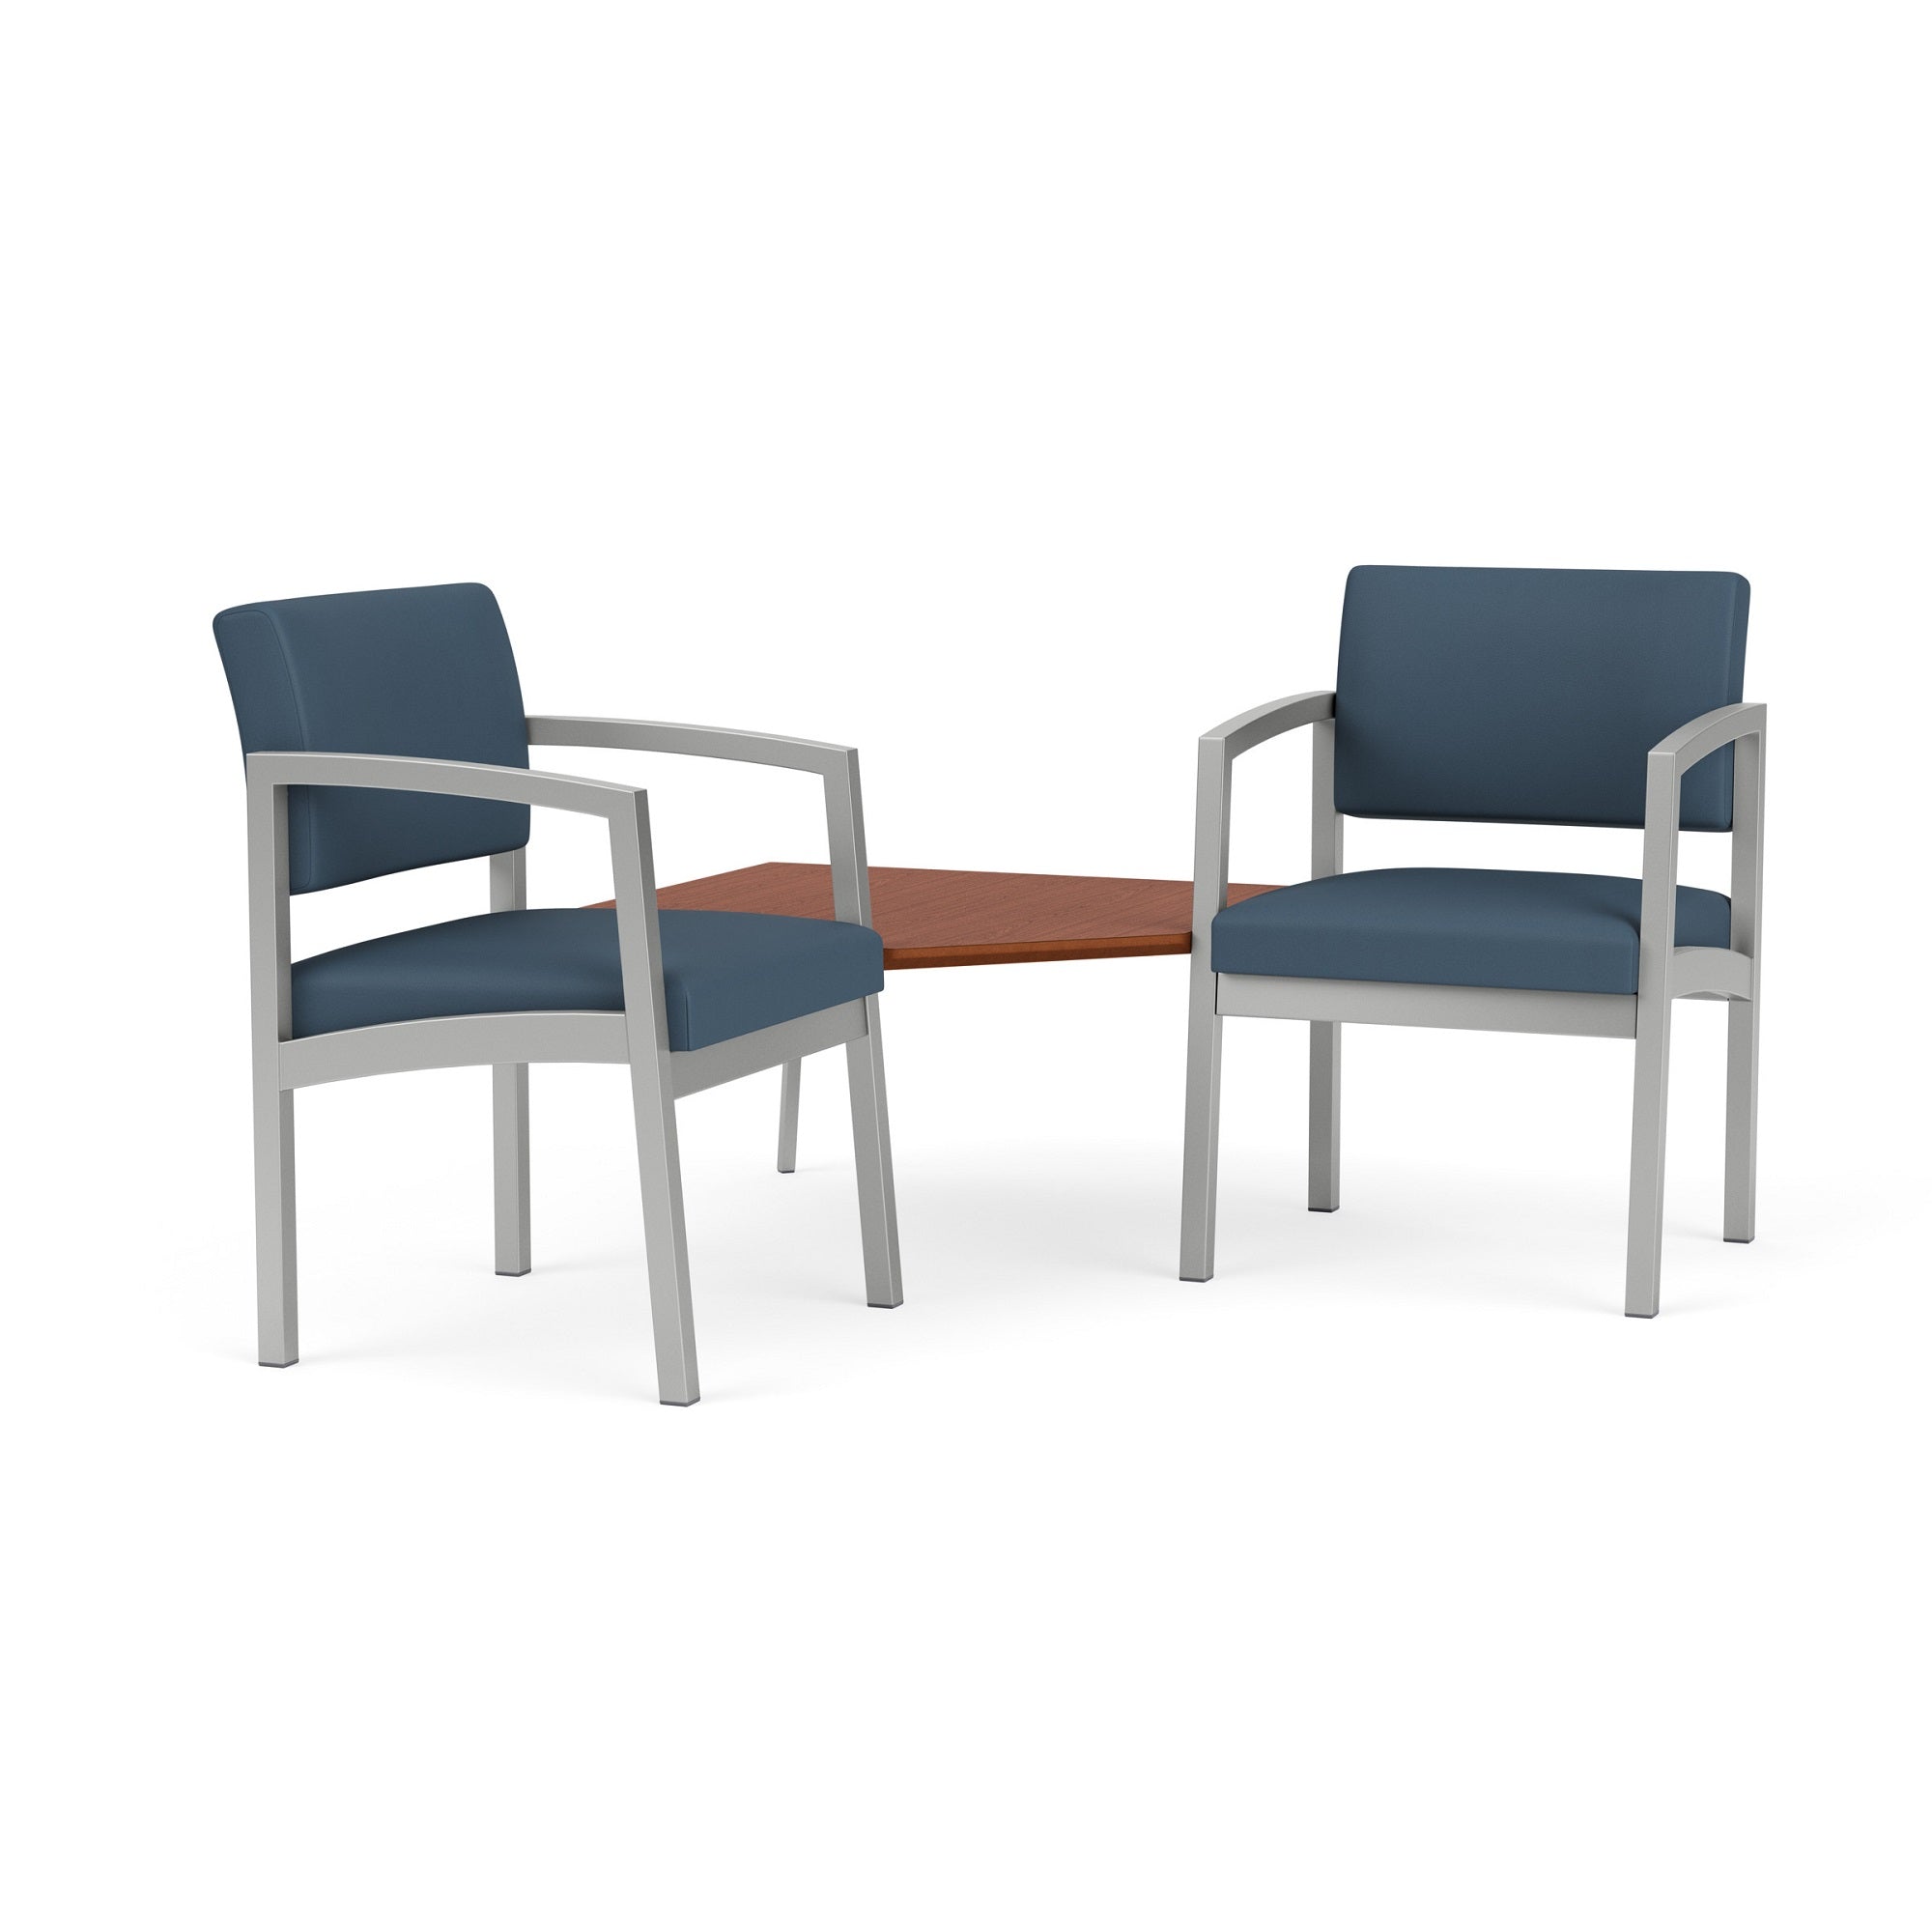 Lenox Steel Collection Reception Seating, 2 Chairs with Connecting Corner Table, Standard Vinyl Upholstery, FREE SHIPPING